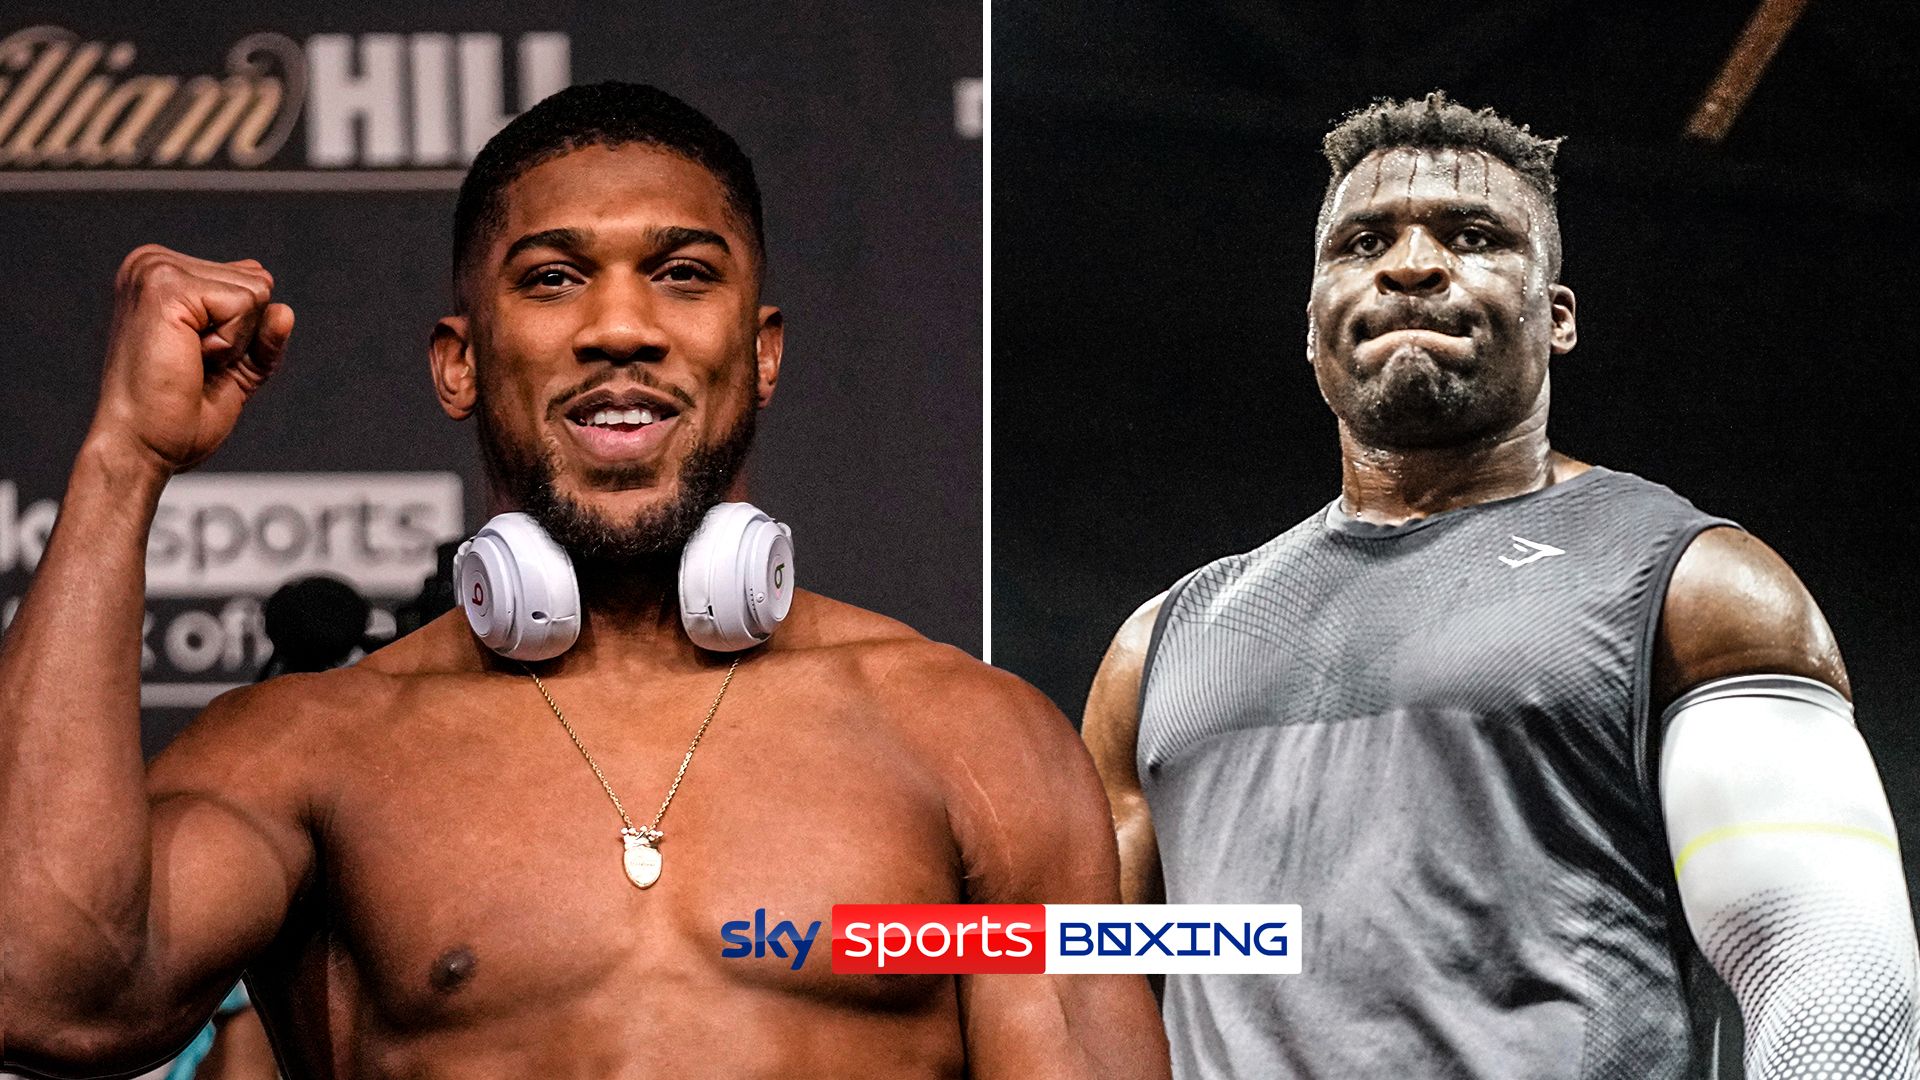 Joshua vs Ngannou: All you need to know ahead of Friday's fight